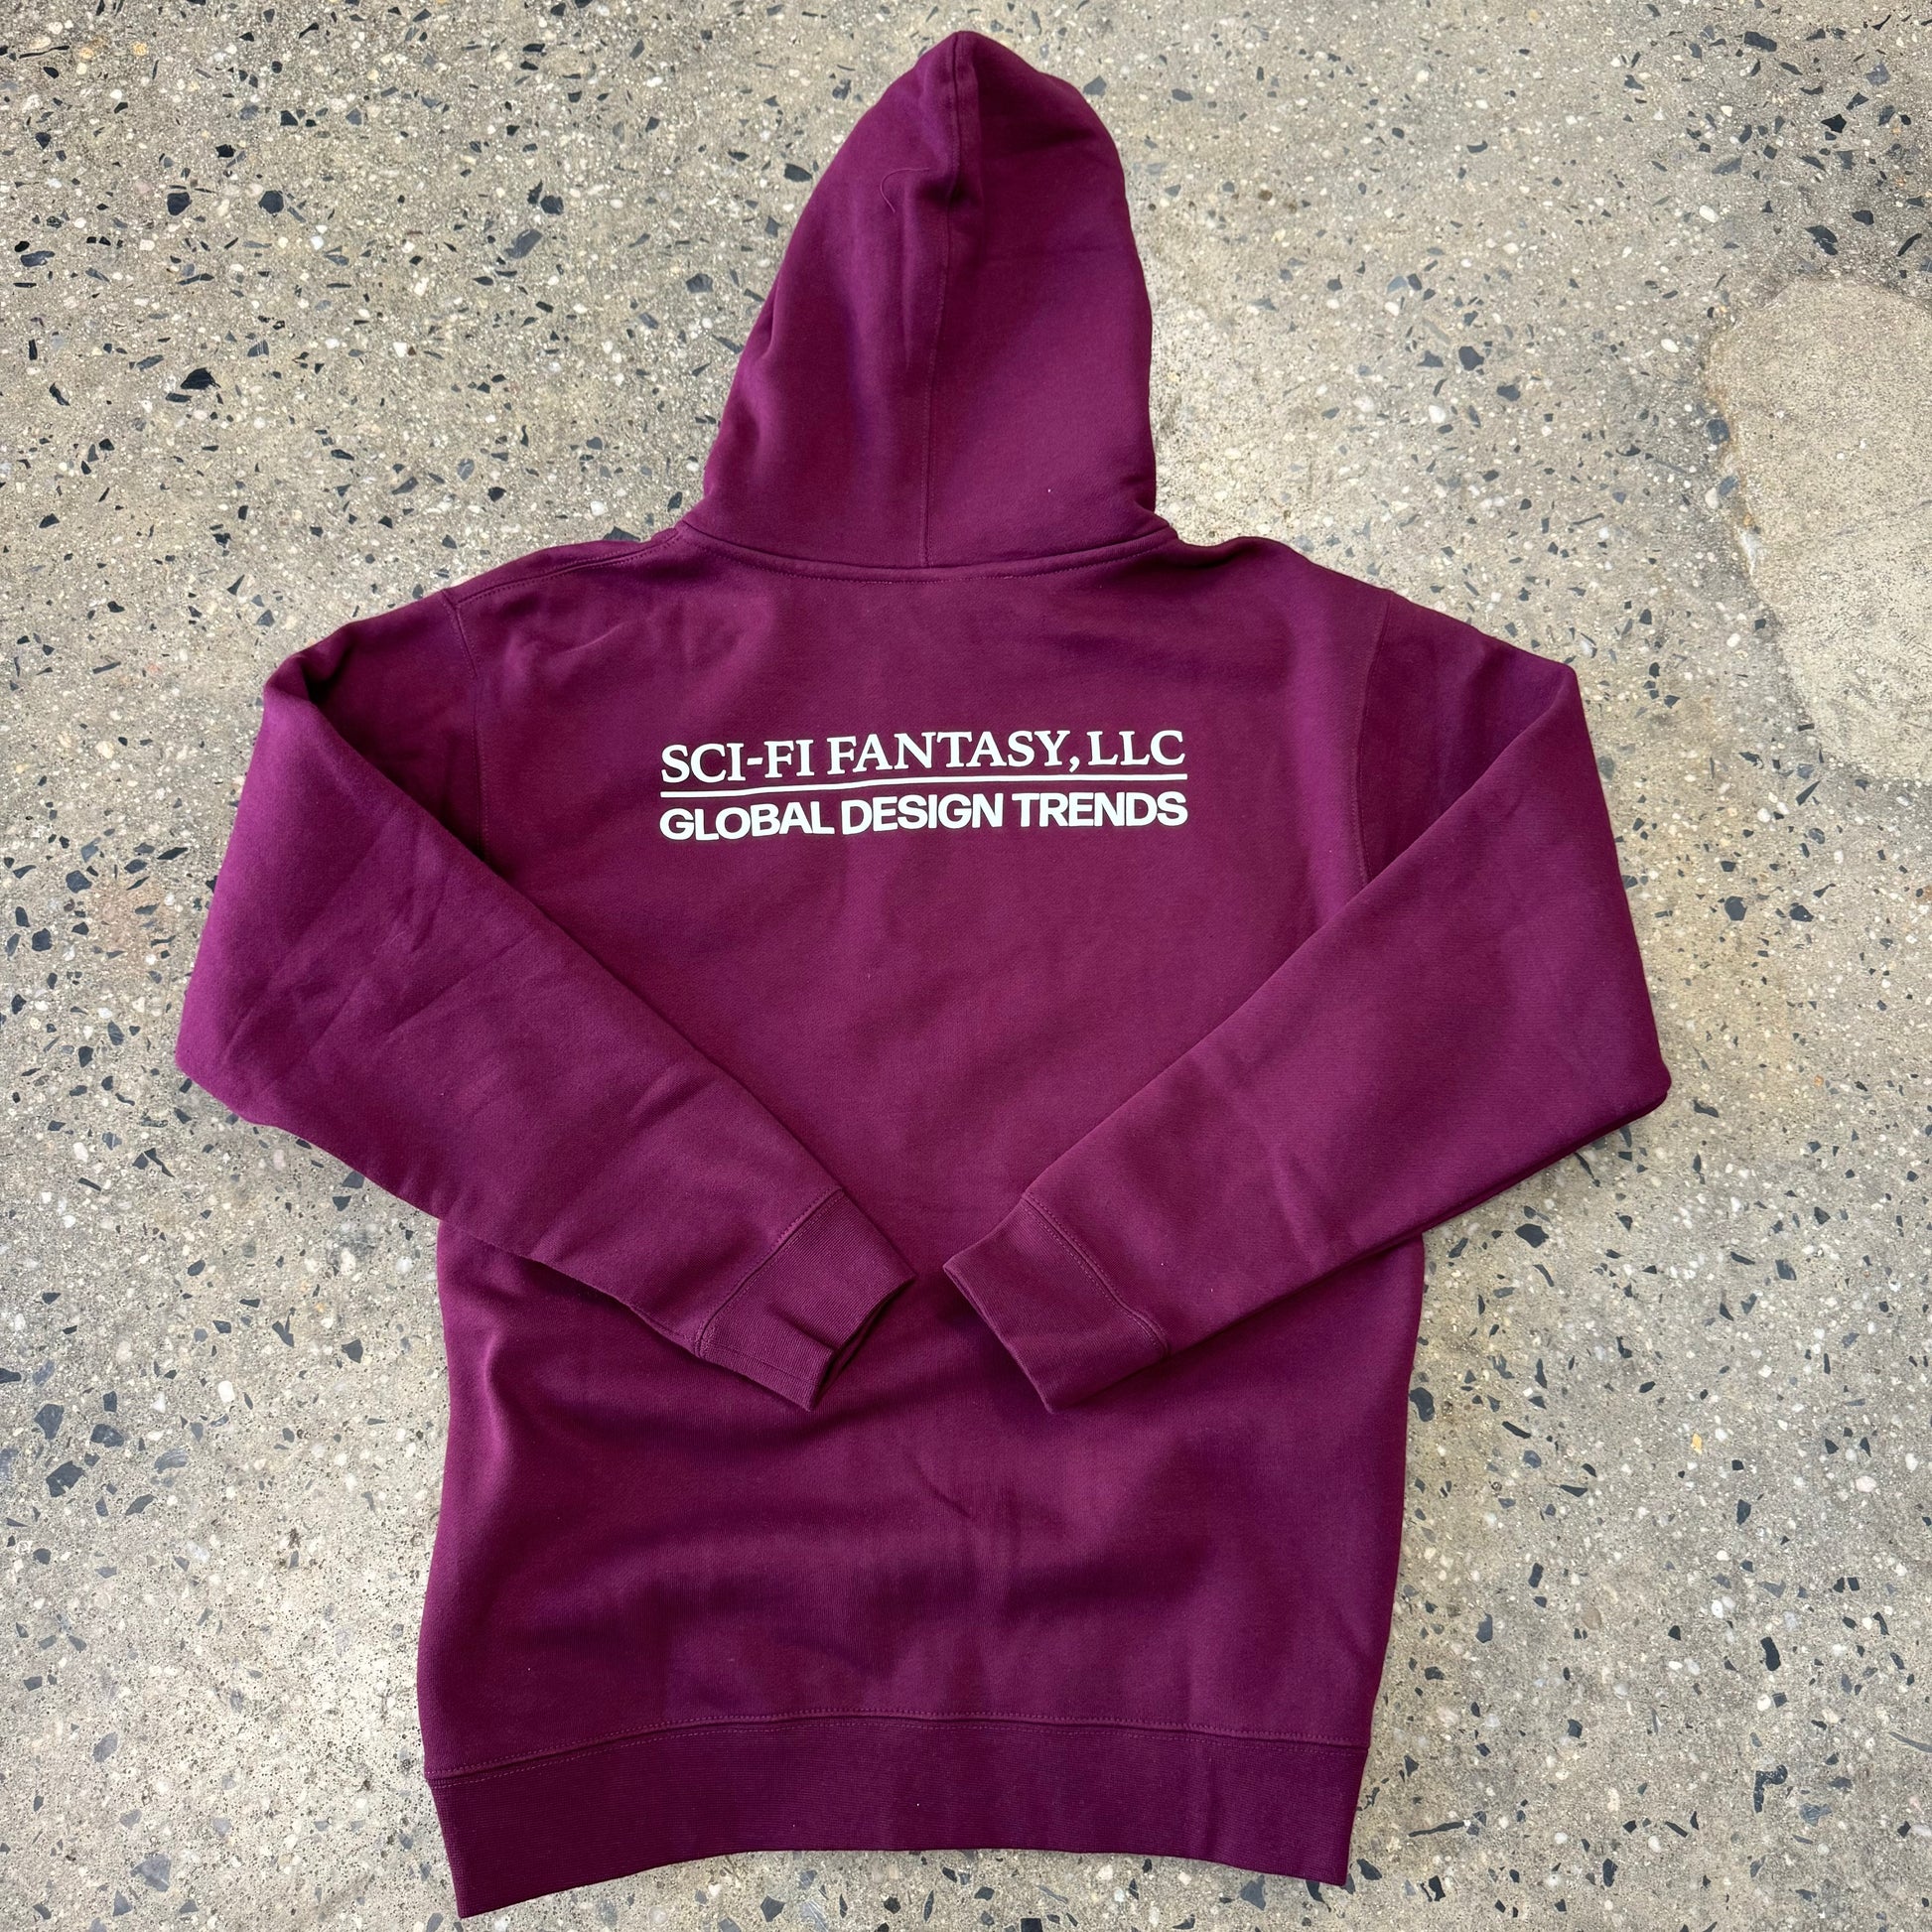 back view of maroon hoodie with white logo across shoulders